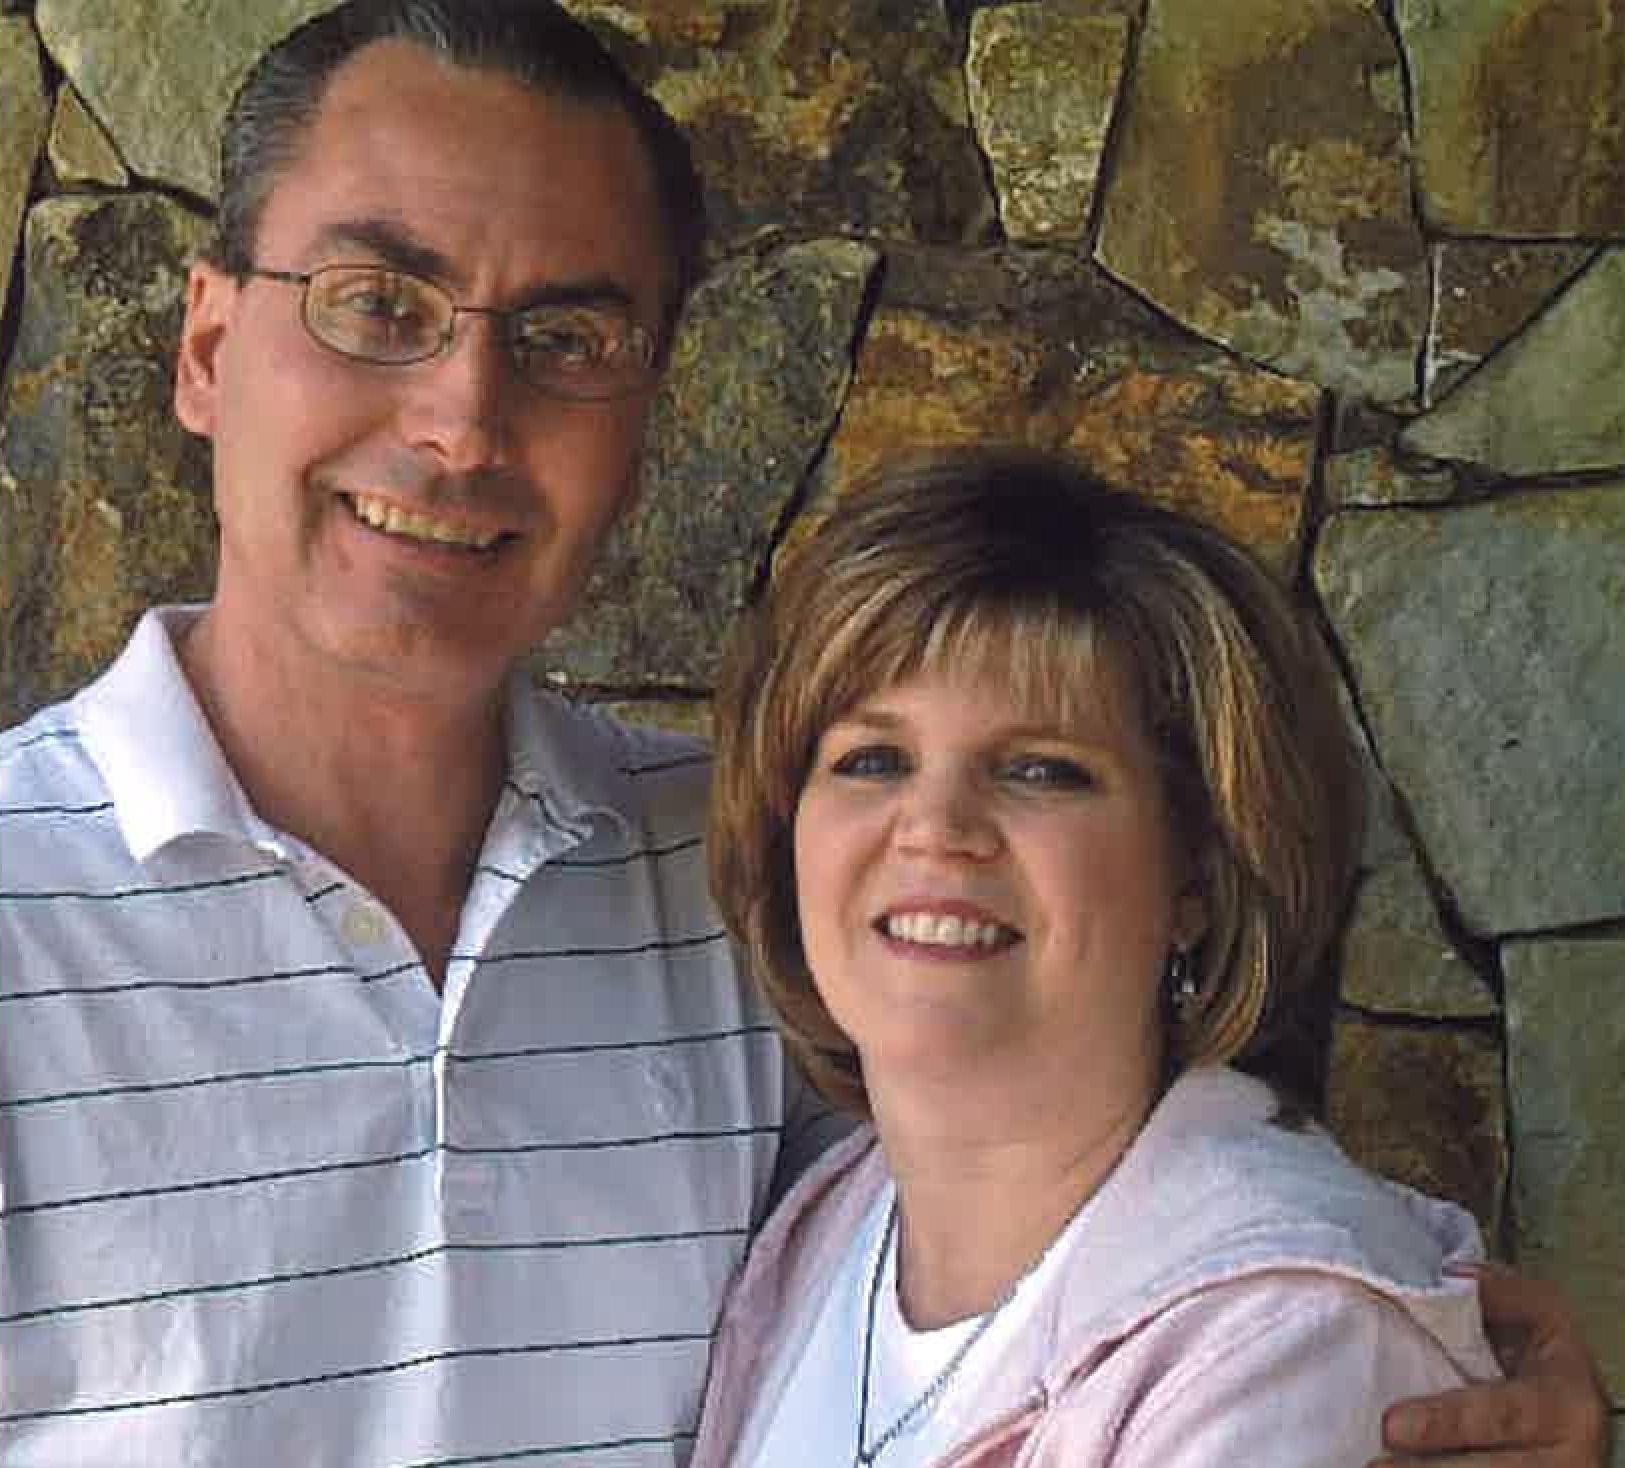 Portrait of Mark Brand with his wife, Lori